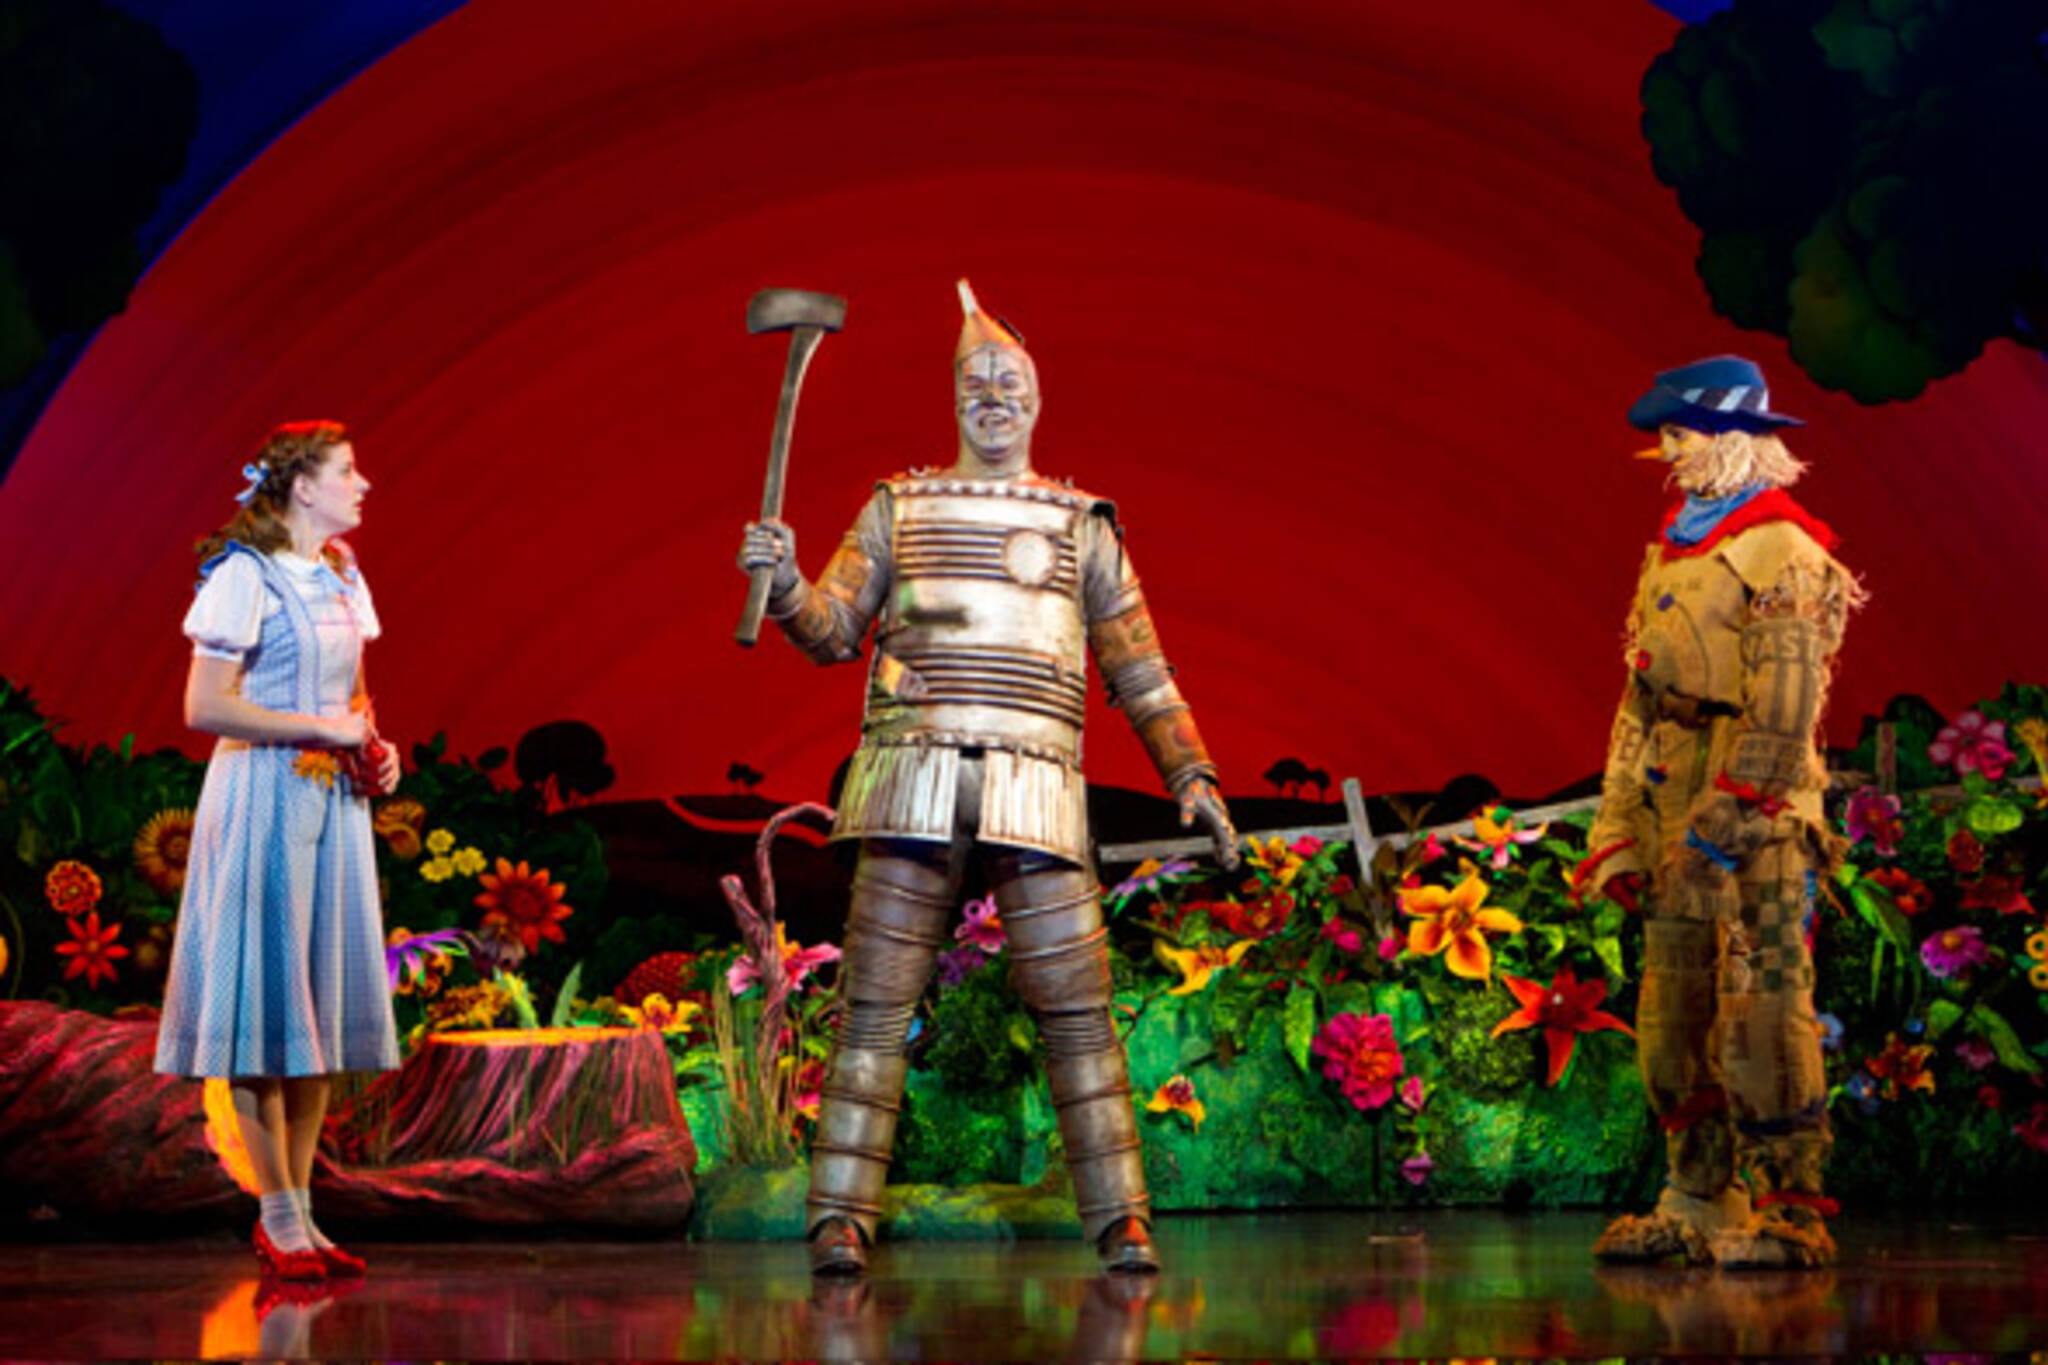 new-wizard-of-oz-production-sticks-close-to-the-classic